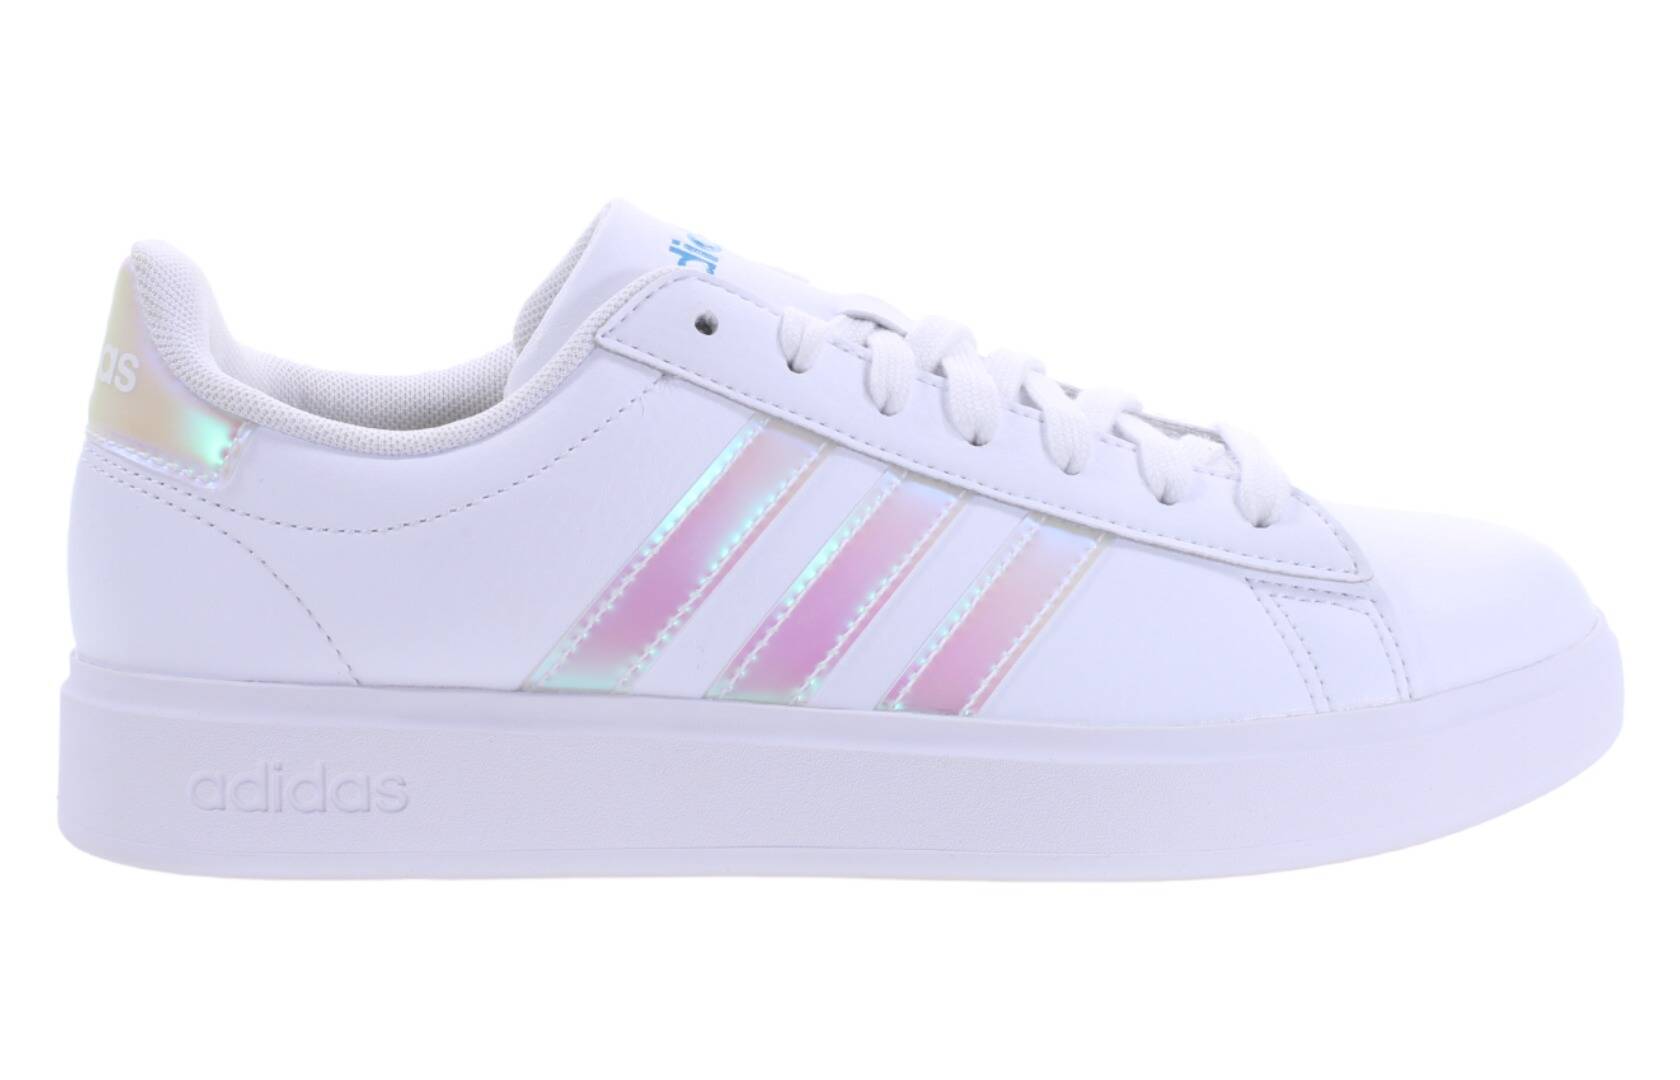 Adidas GRAND COURT 2.0 IE1868 women's shoes